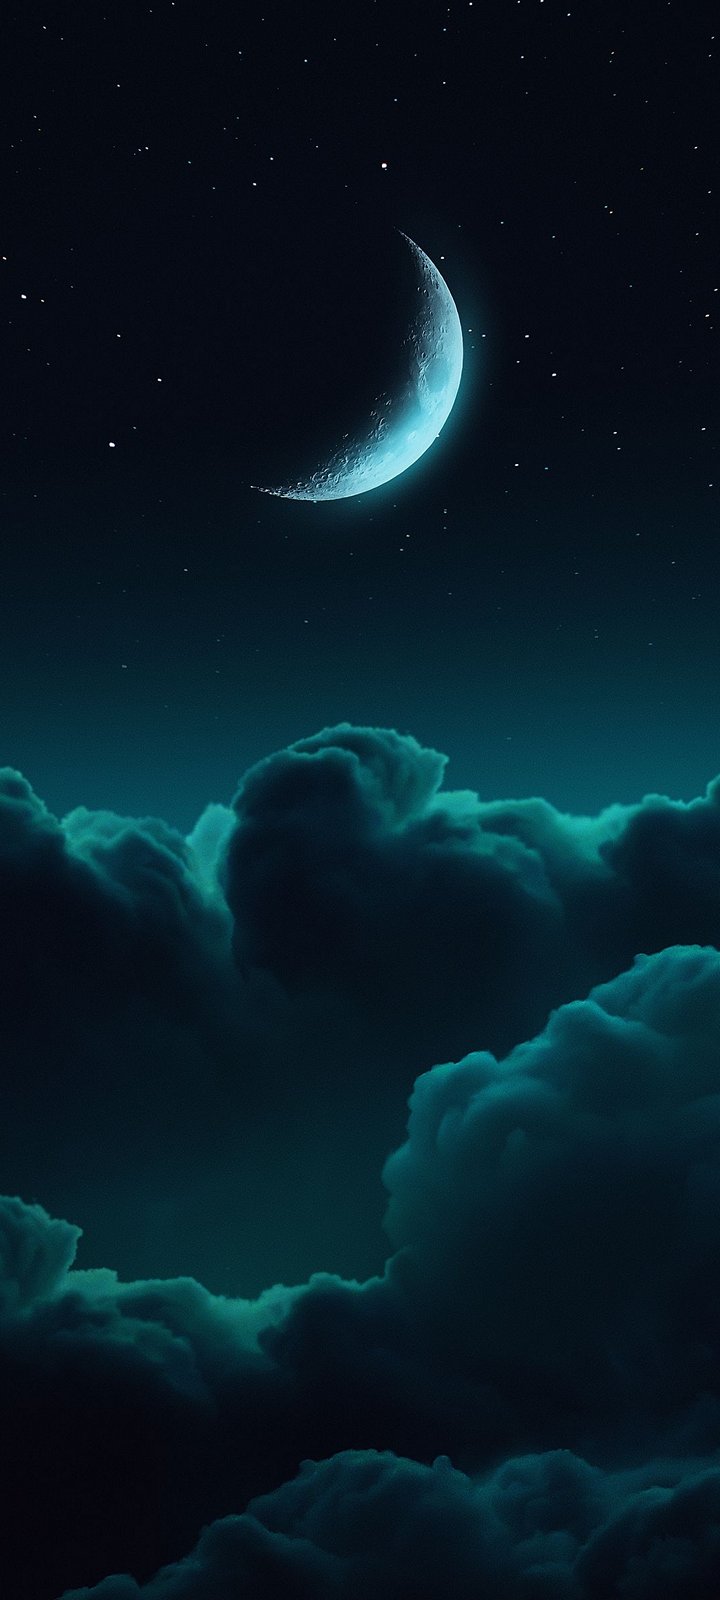 Clouds Moon Background Wallpaper 720x1600 – S1 - Chill-out Wallpapers